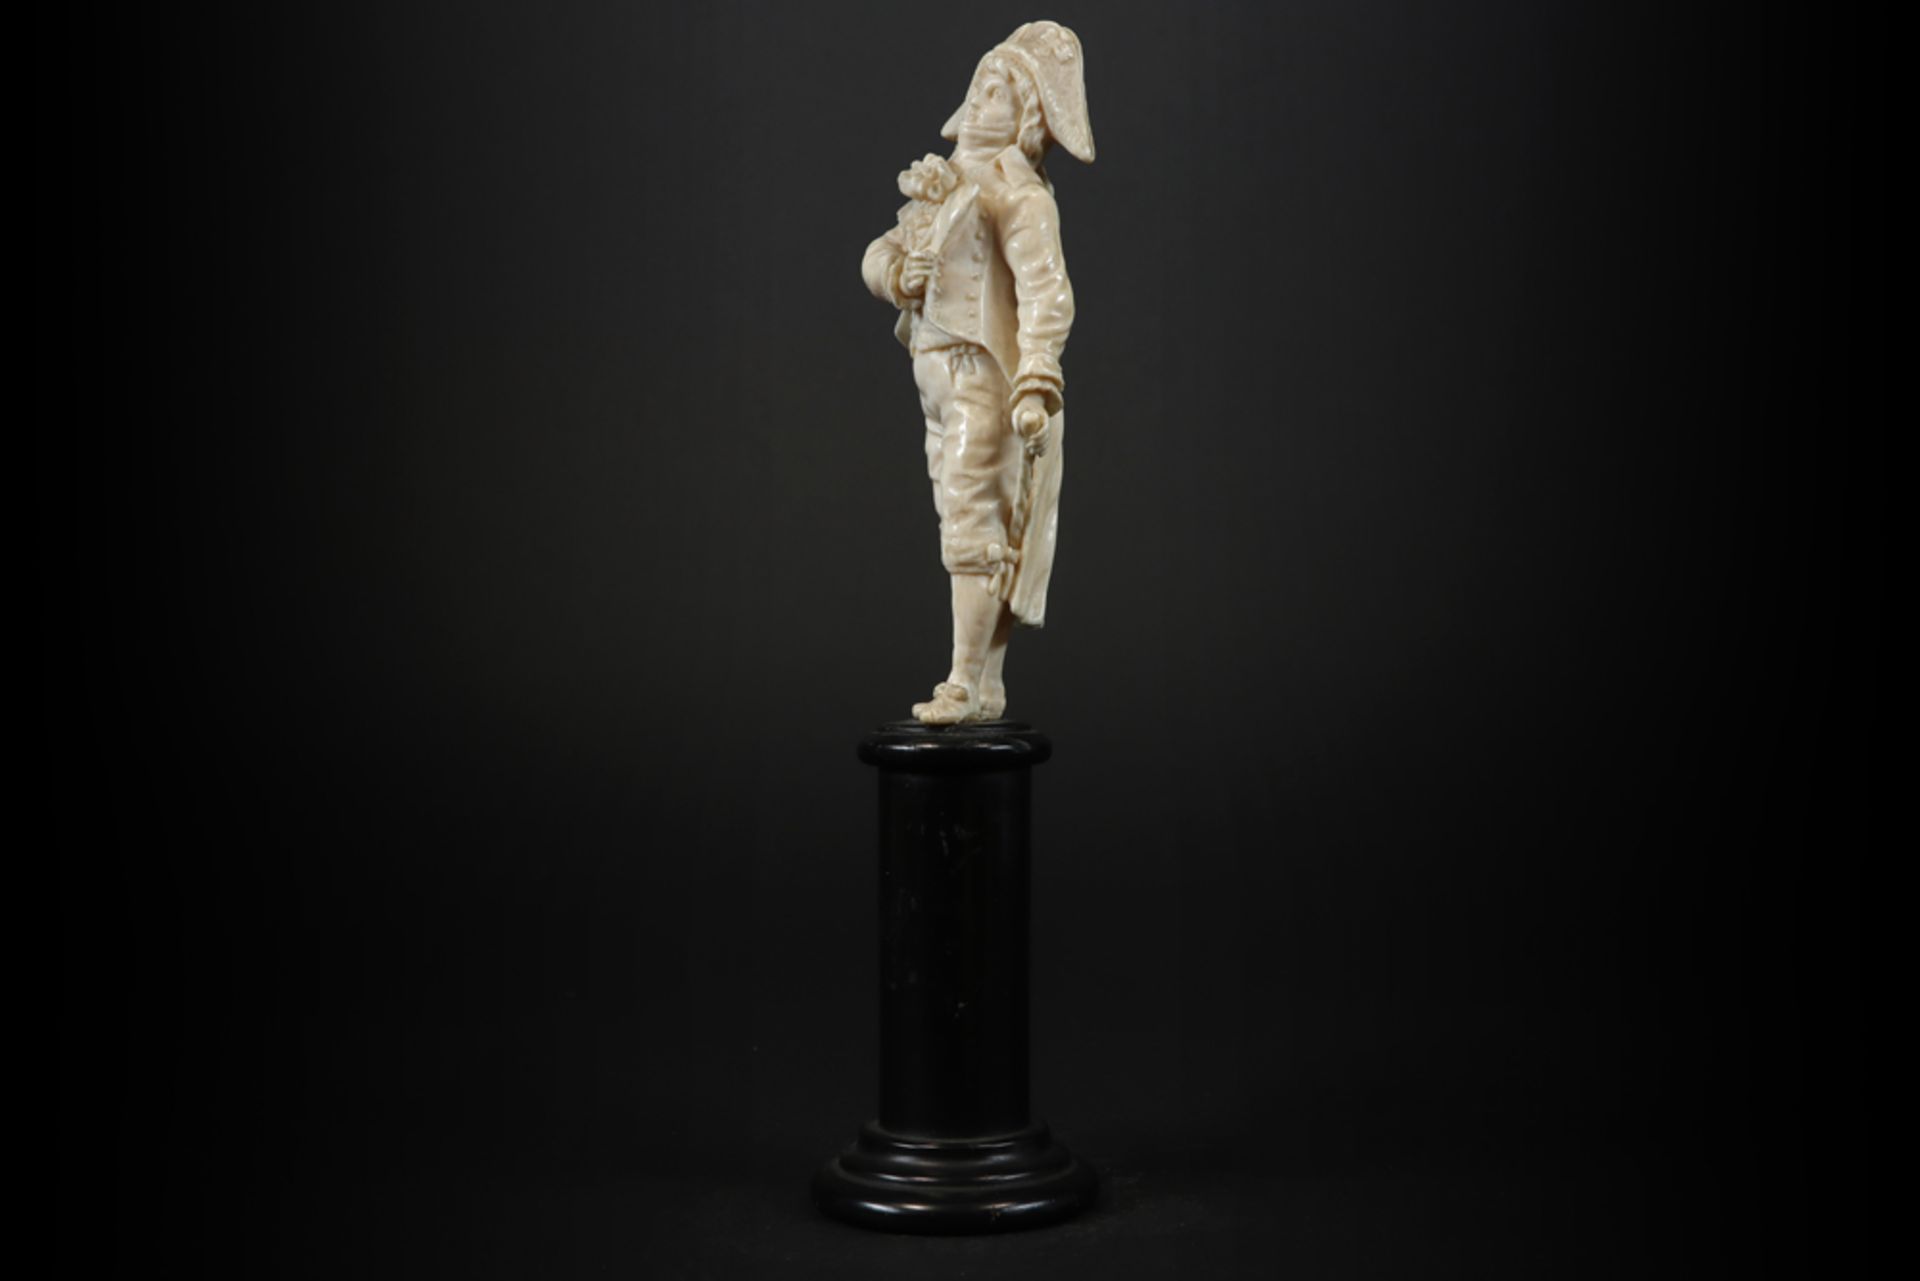 19th Cent. French sculpture in ivory, probably made in Dieppe - with European CITES certificate || - Image 2 of 5